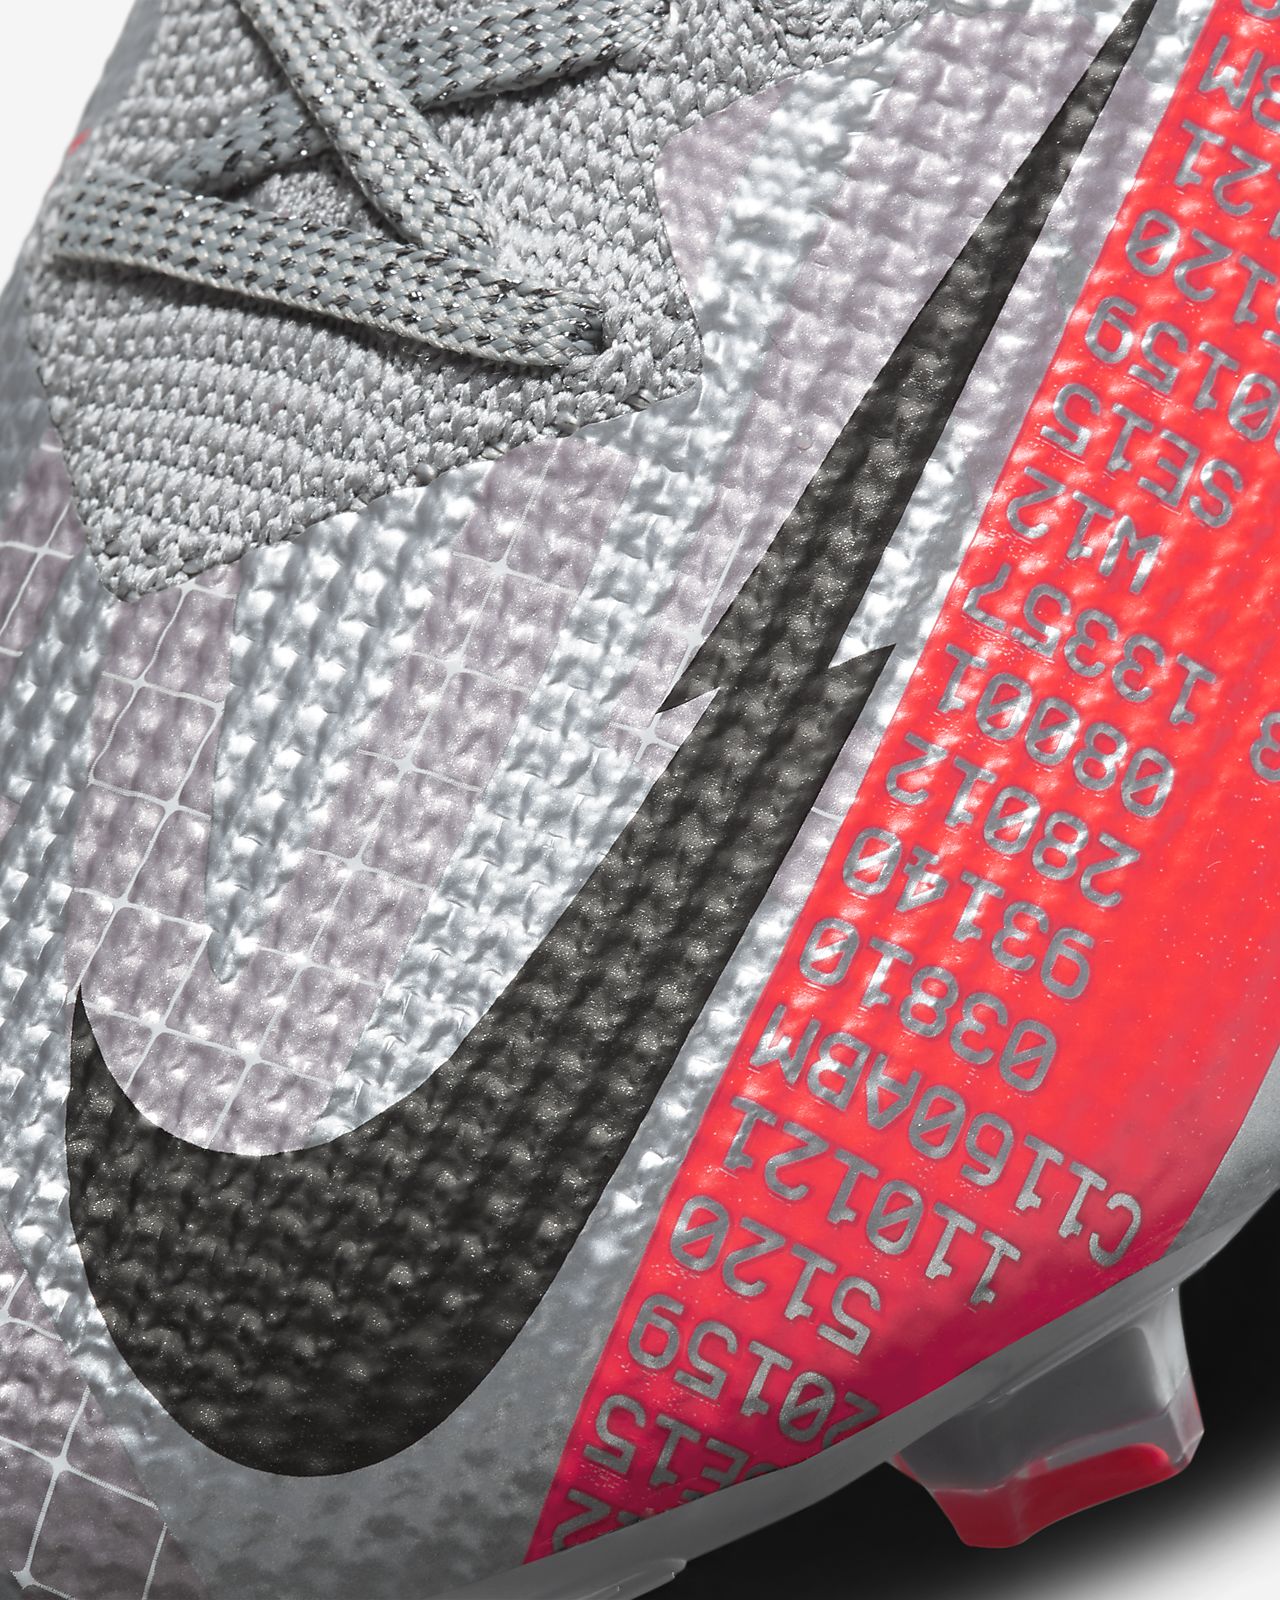 Details about Full Box Nike Mercurial Superfly 7 Elite FG Multi.